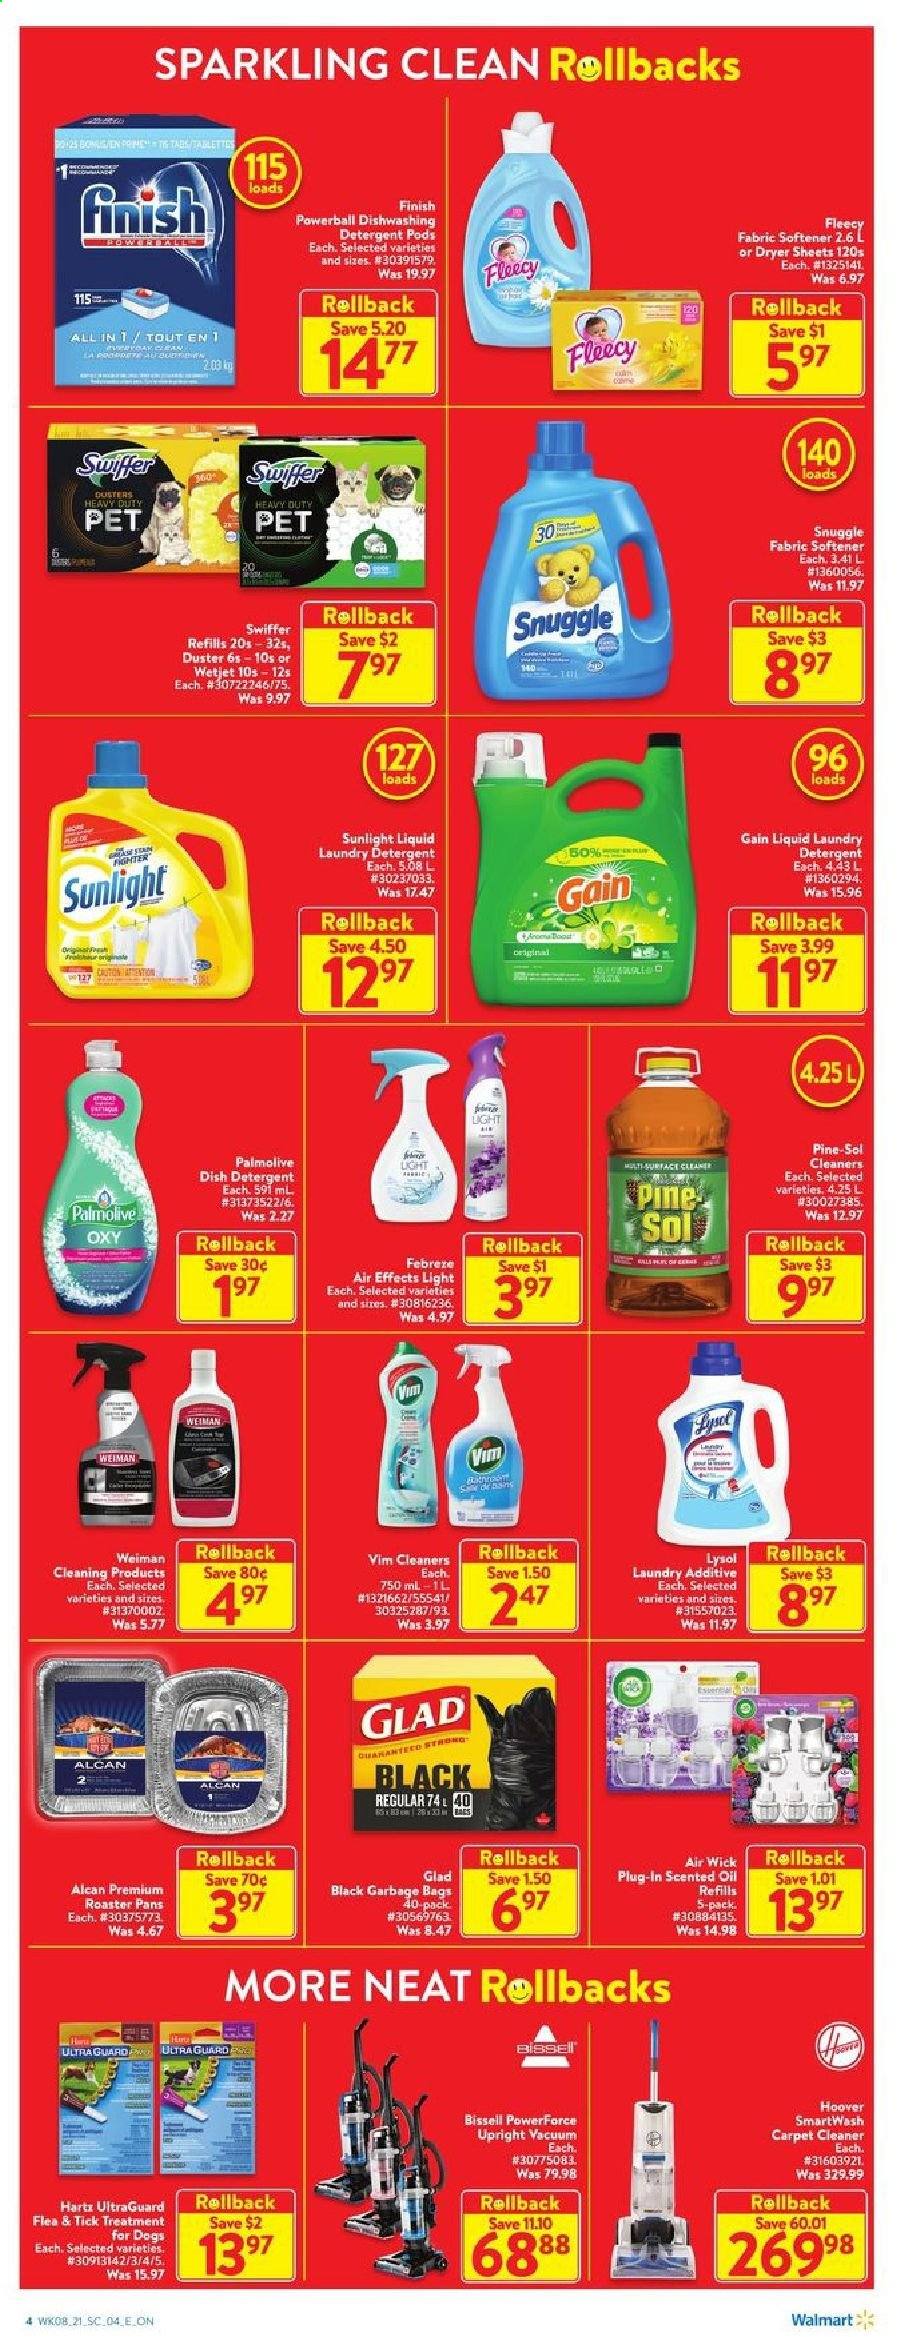 thumbnail - Walmart Flyer - March 18, 2021 - March 24, 2021 - Sales products - oil, Gain, cleaner, Lysol, Pine-Sol, Swiffer, Snuggle, fabric softener, laundry detergent, Sunlight, dryer sheets, Finish Powerball, Palmolive, duster, WetJet, Air Wick, scented oil, Bissell, roaster. Page 4.